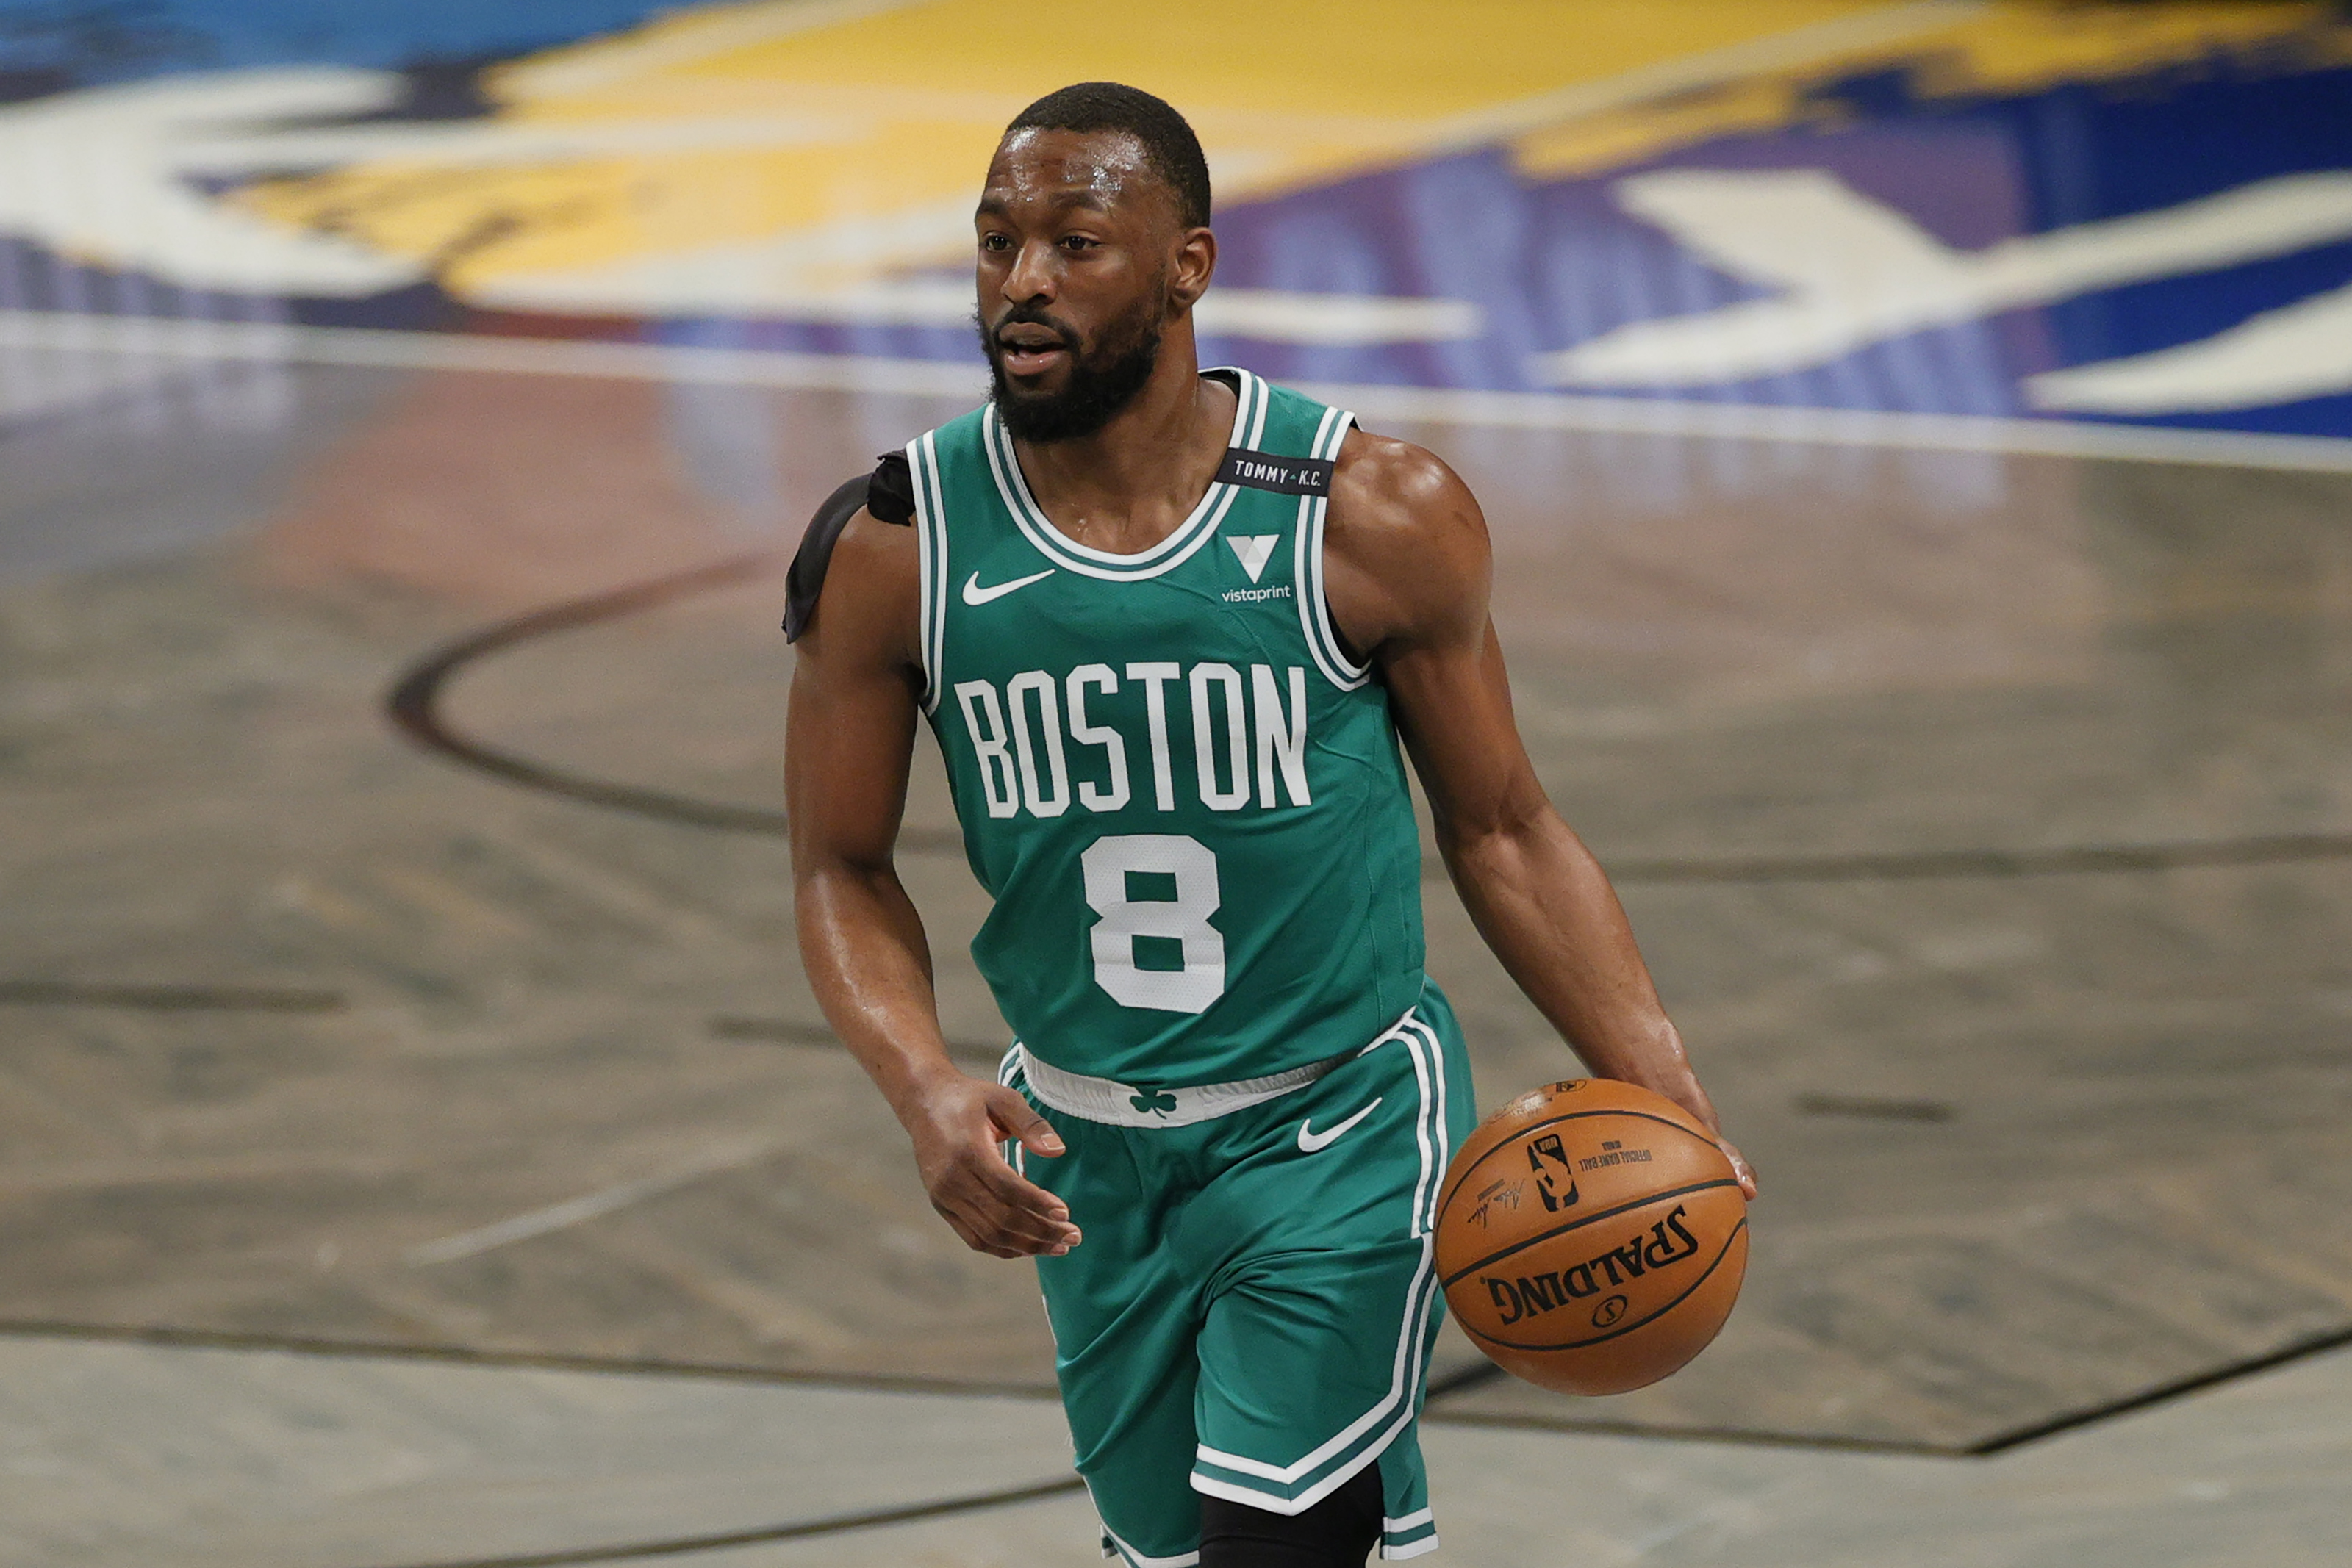 The Kemba Walker Injury Is A Bad Look For The Celtics